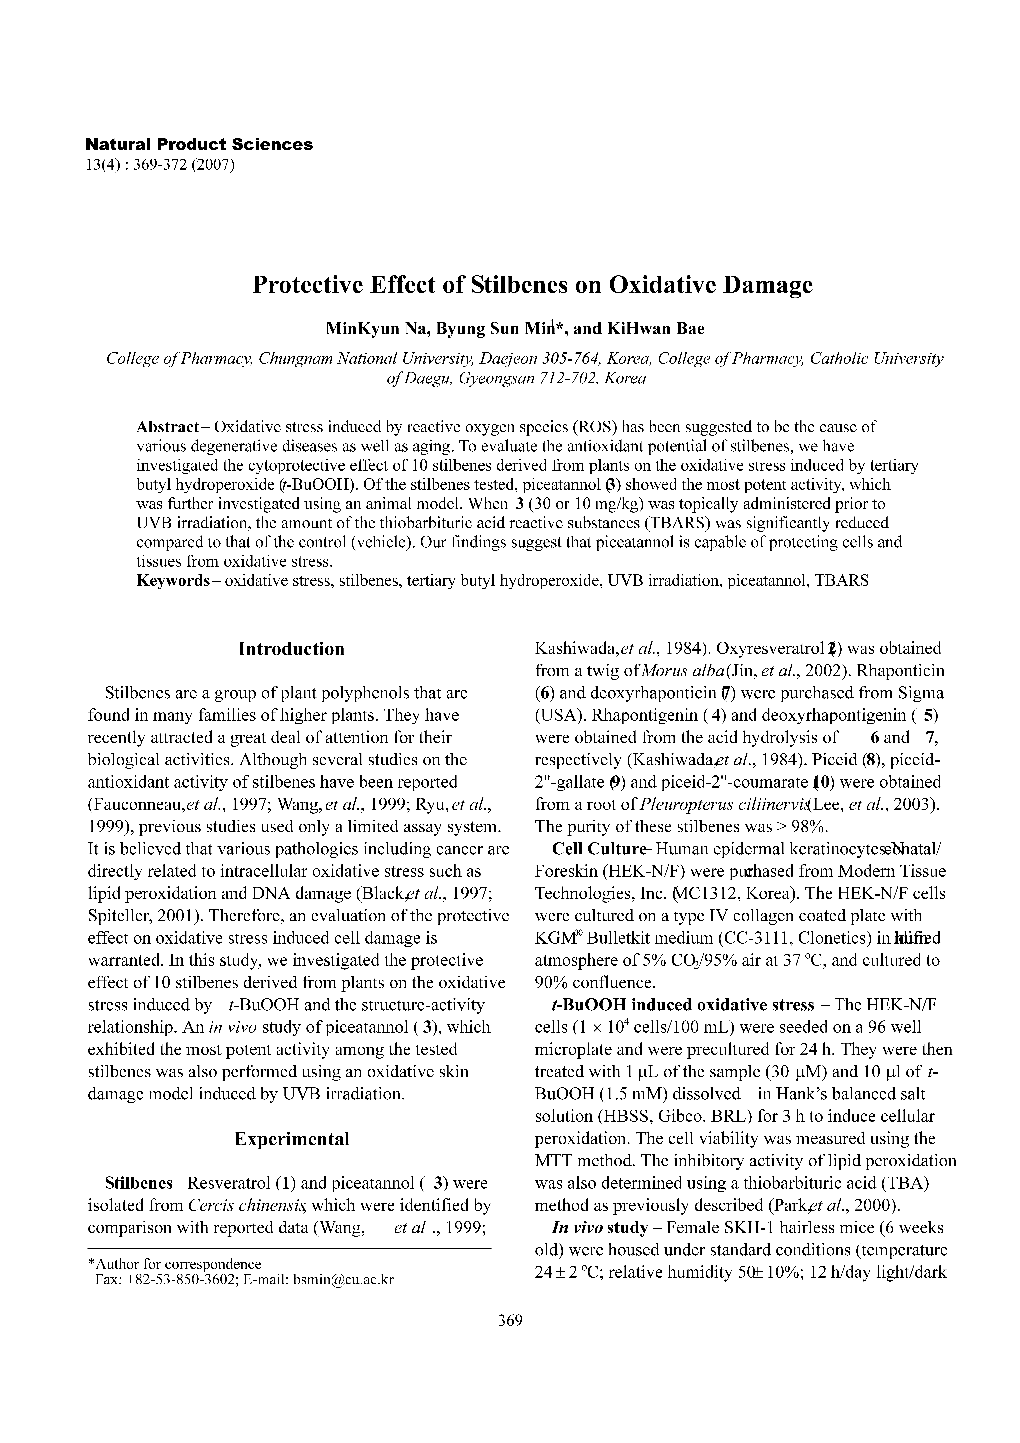 Protective Effect of Stilbenes on Oxidative Damage